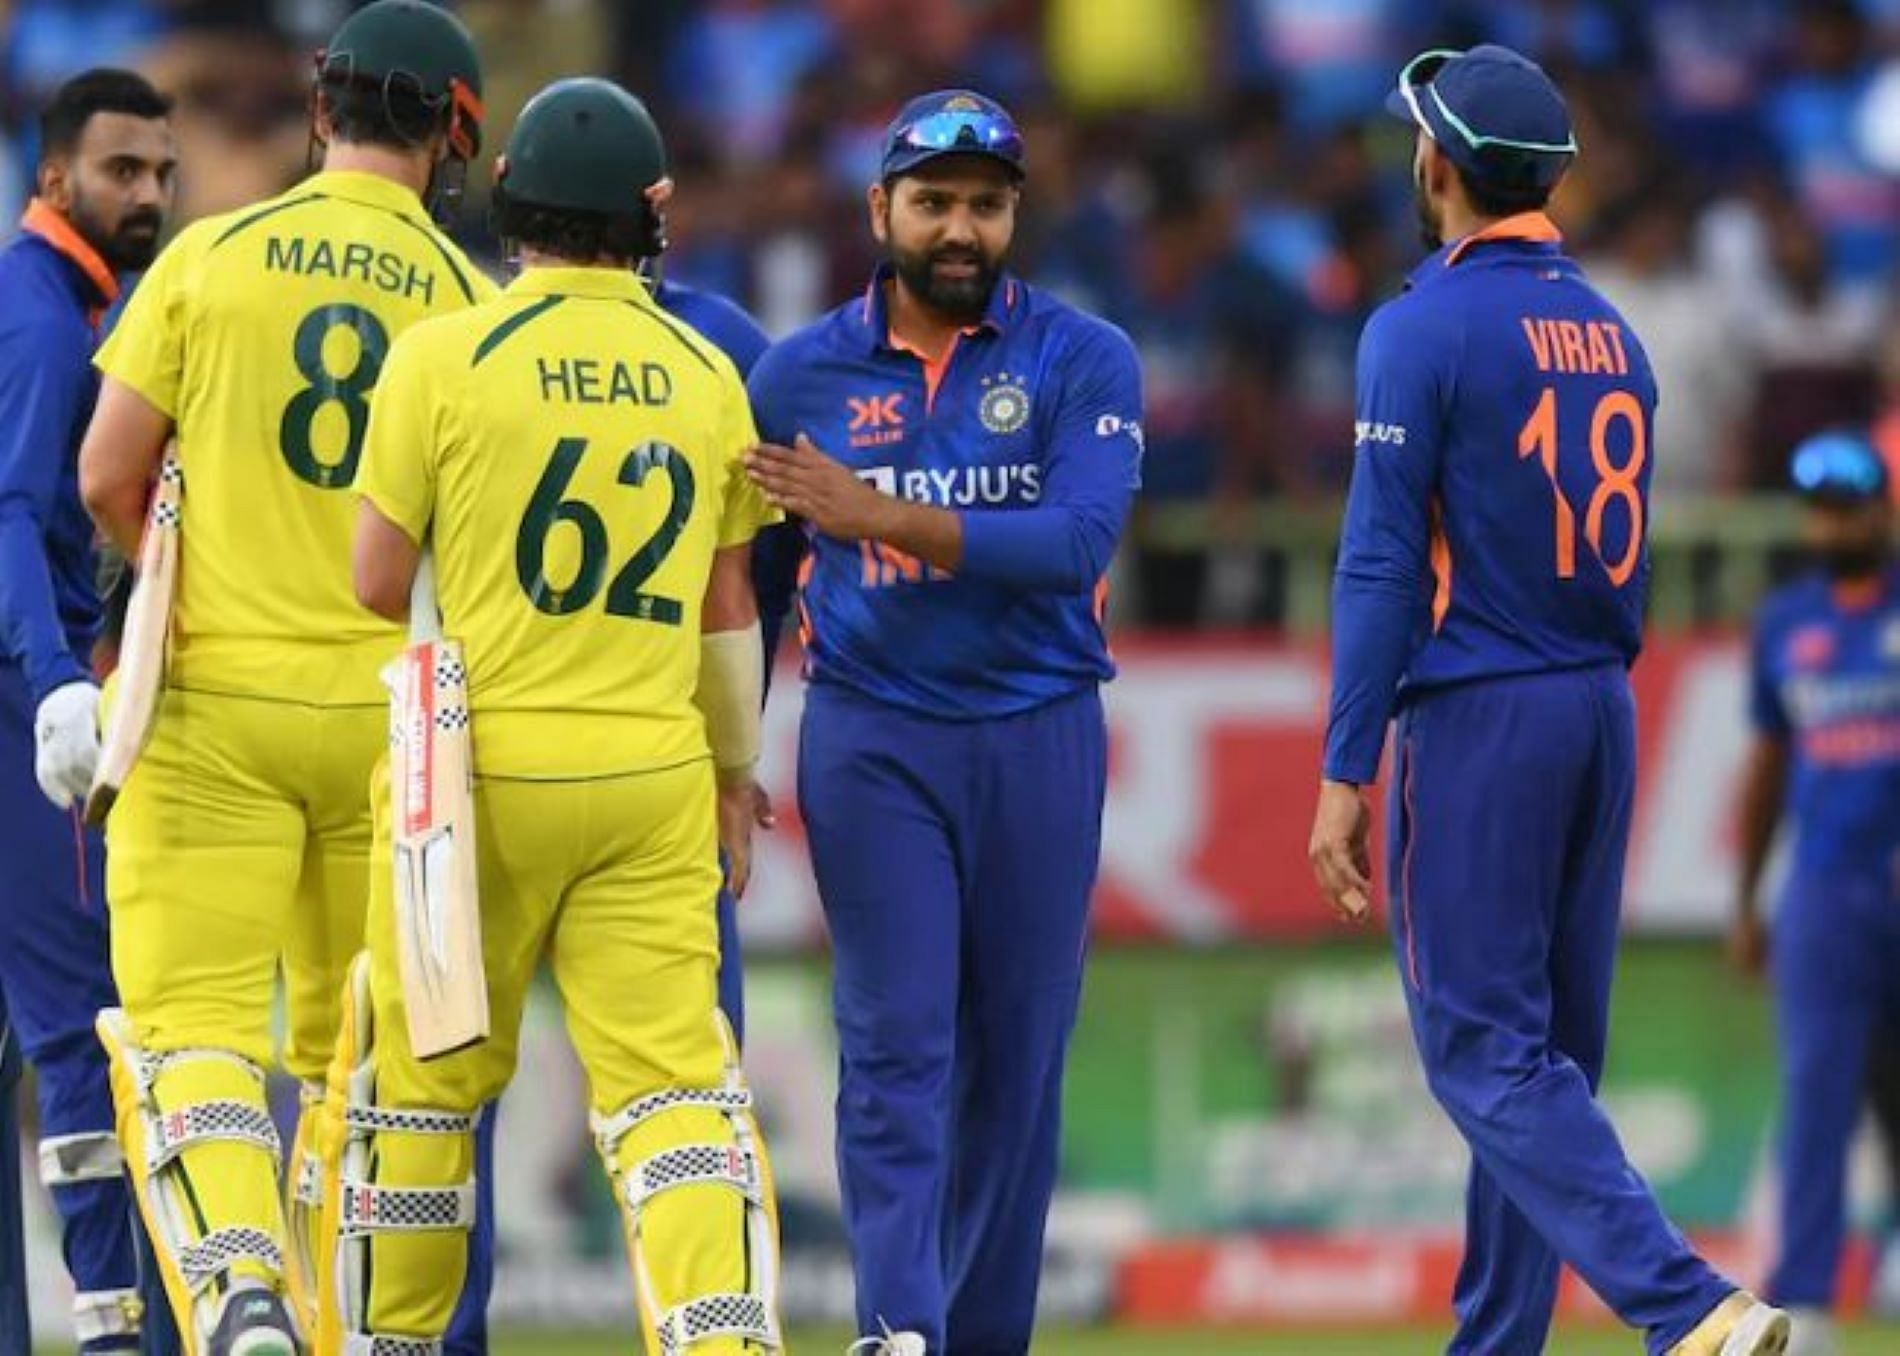 Team India suffered a shock defeat to Australia at home earlier in the year.